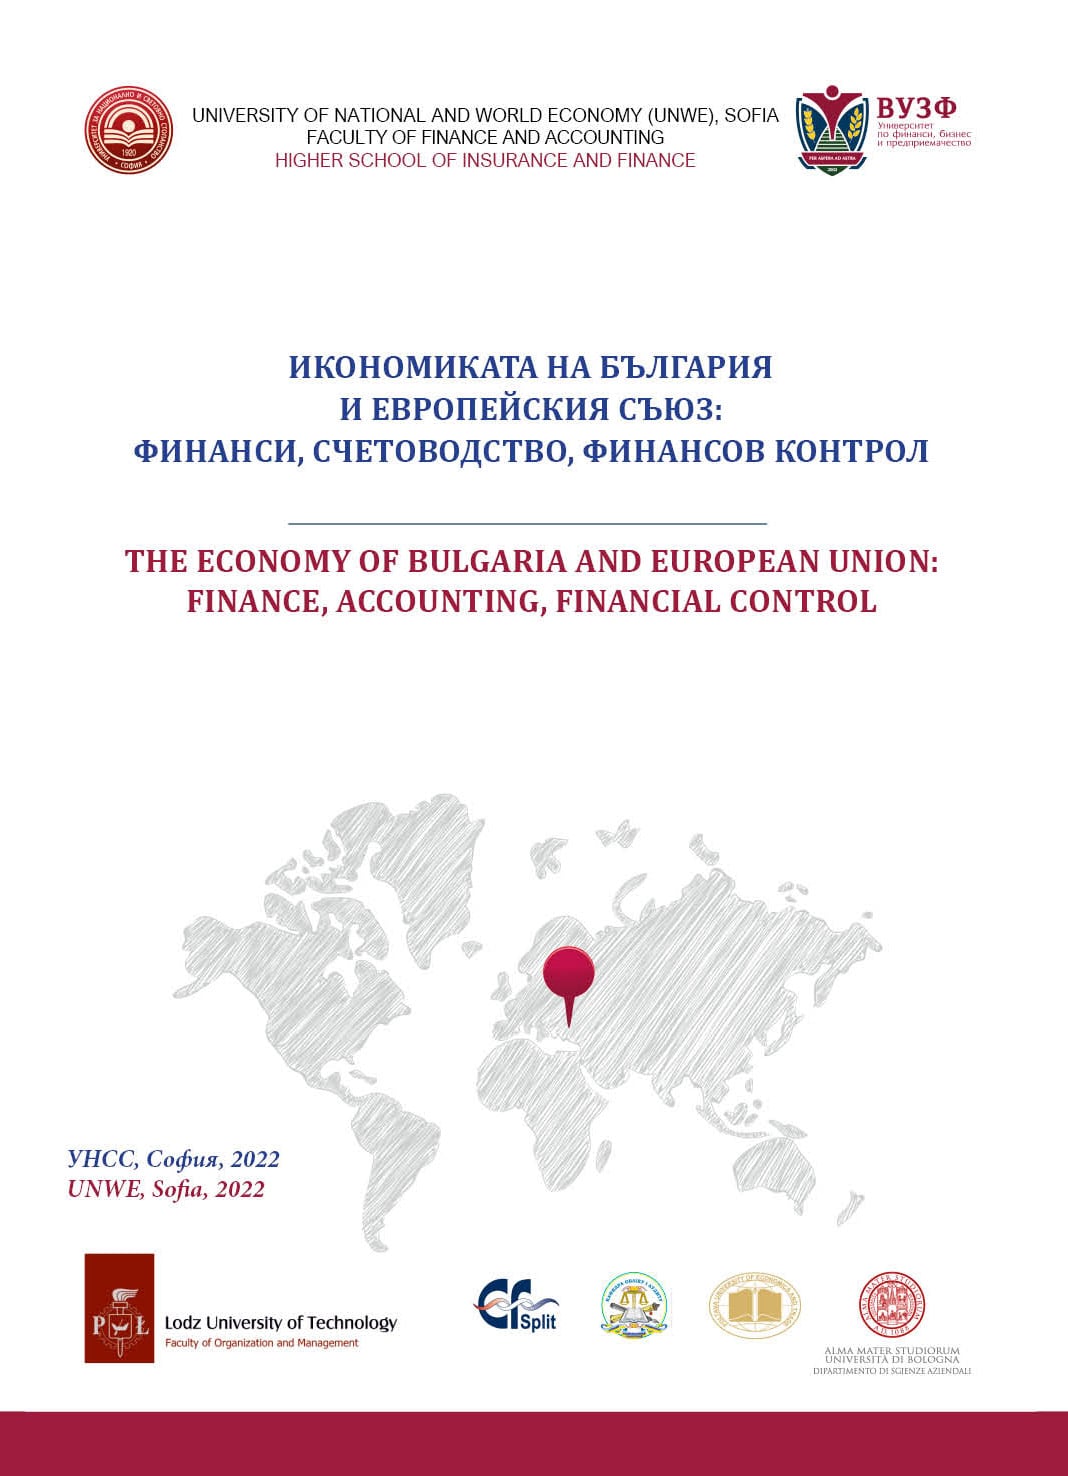 The Economy of Bulgaria and European Union: Finance, Accounting, Financial Control